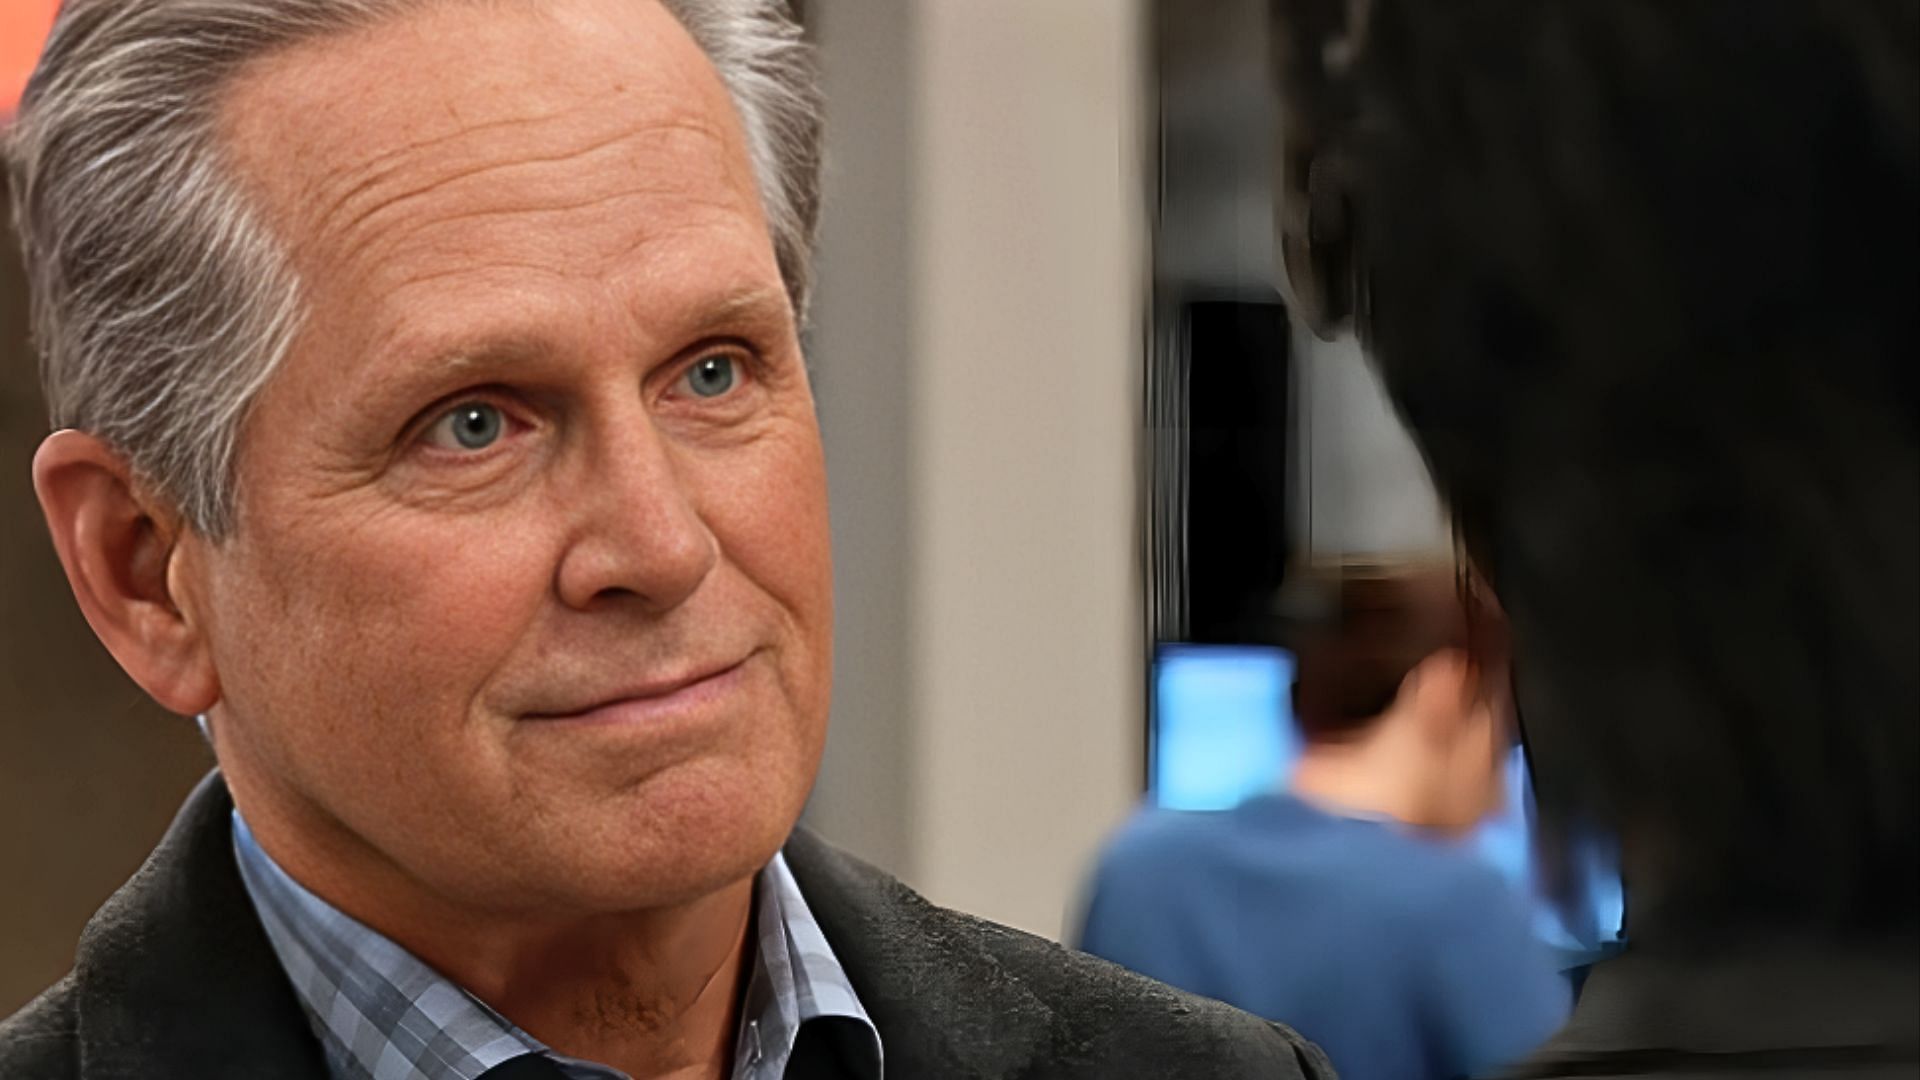 Gregory Harrison as Gregory Chase in a still from General Hospital (Image via ABC)